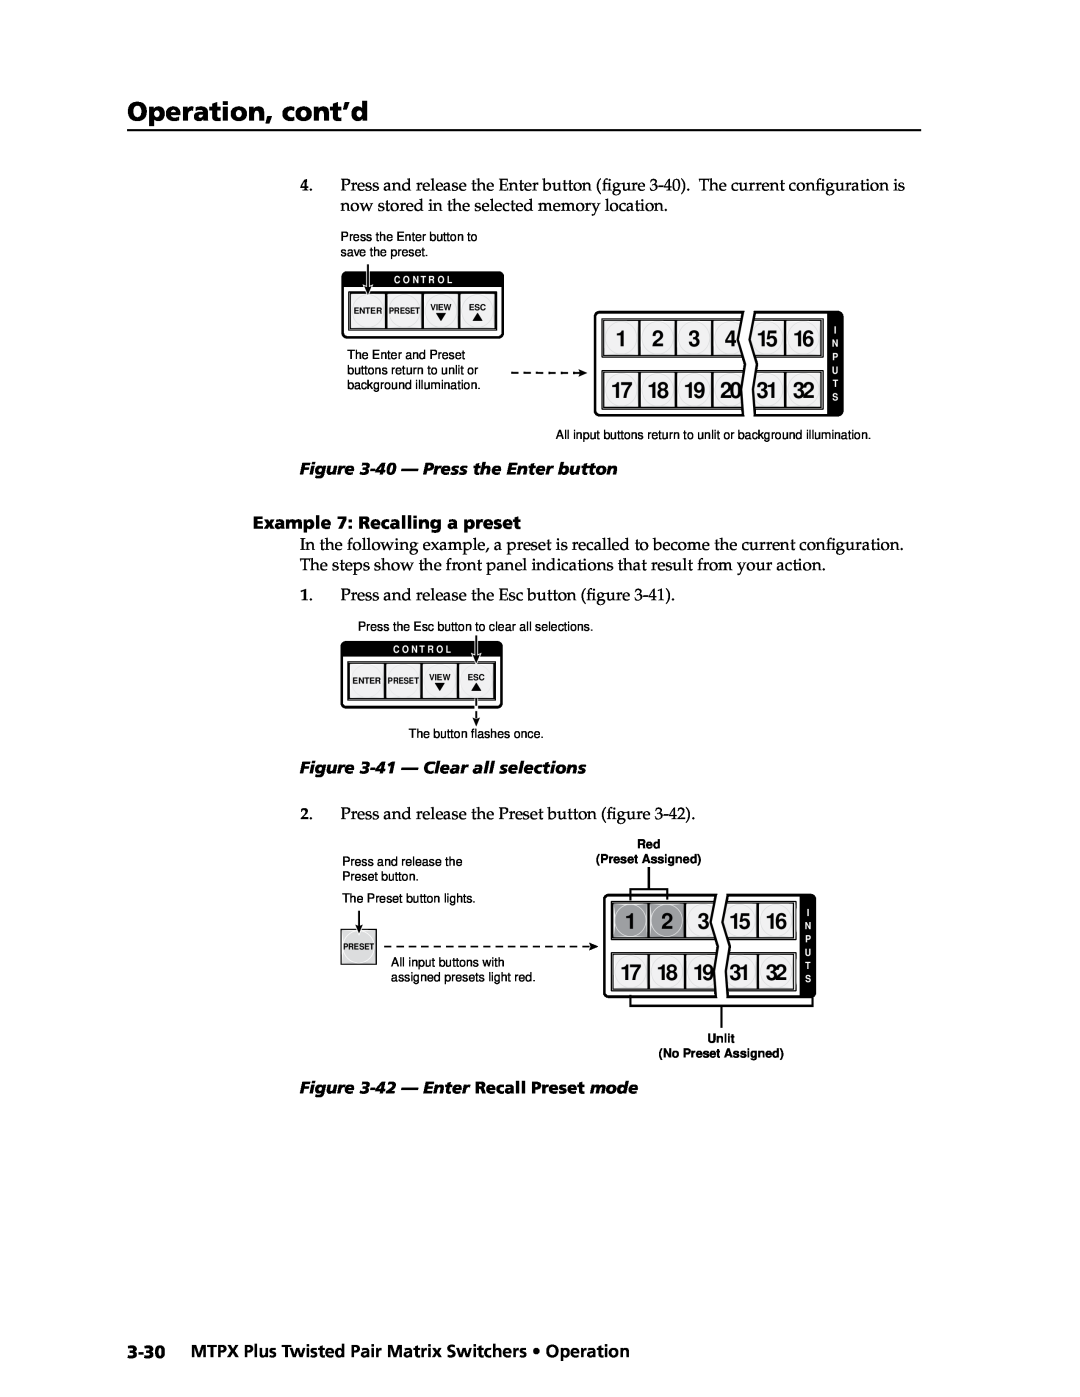 Extron electronic MTPX Plus Series 1 2 3 4, Operation, cont’d, 40 - Press the Enter button, Example 7 Recalling a preset 